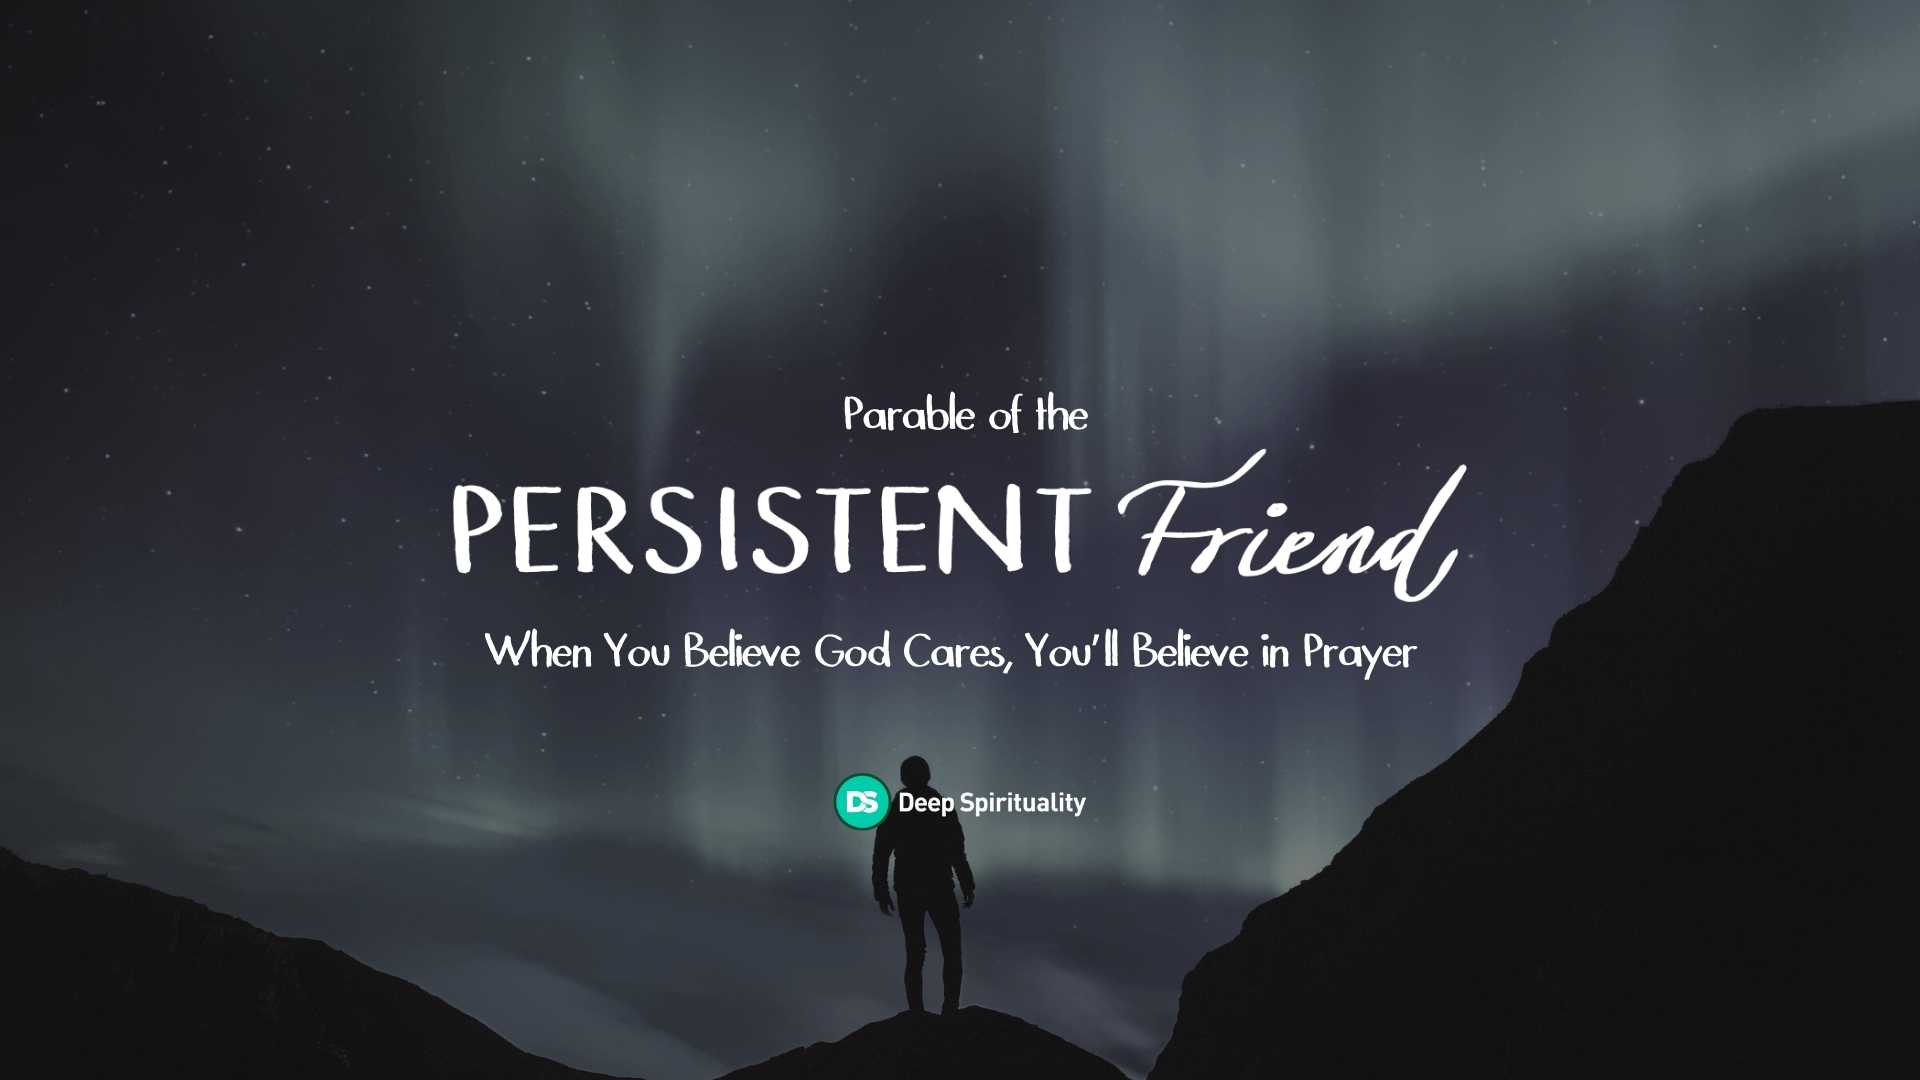 You Can Count On Me: What We Should Learn from the Parable of the Persistent Friend 11